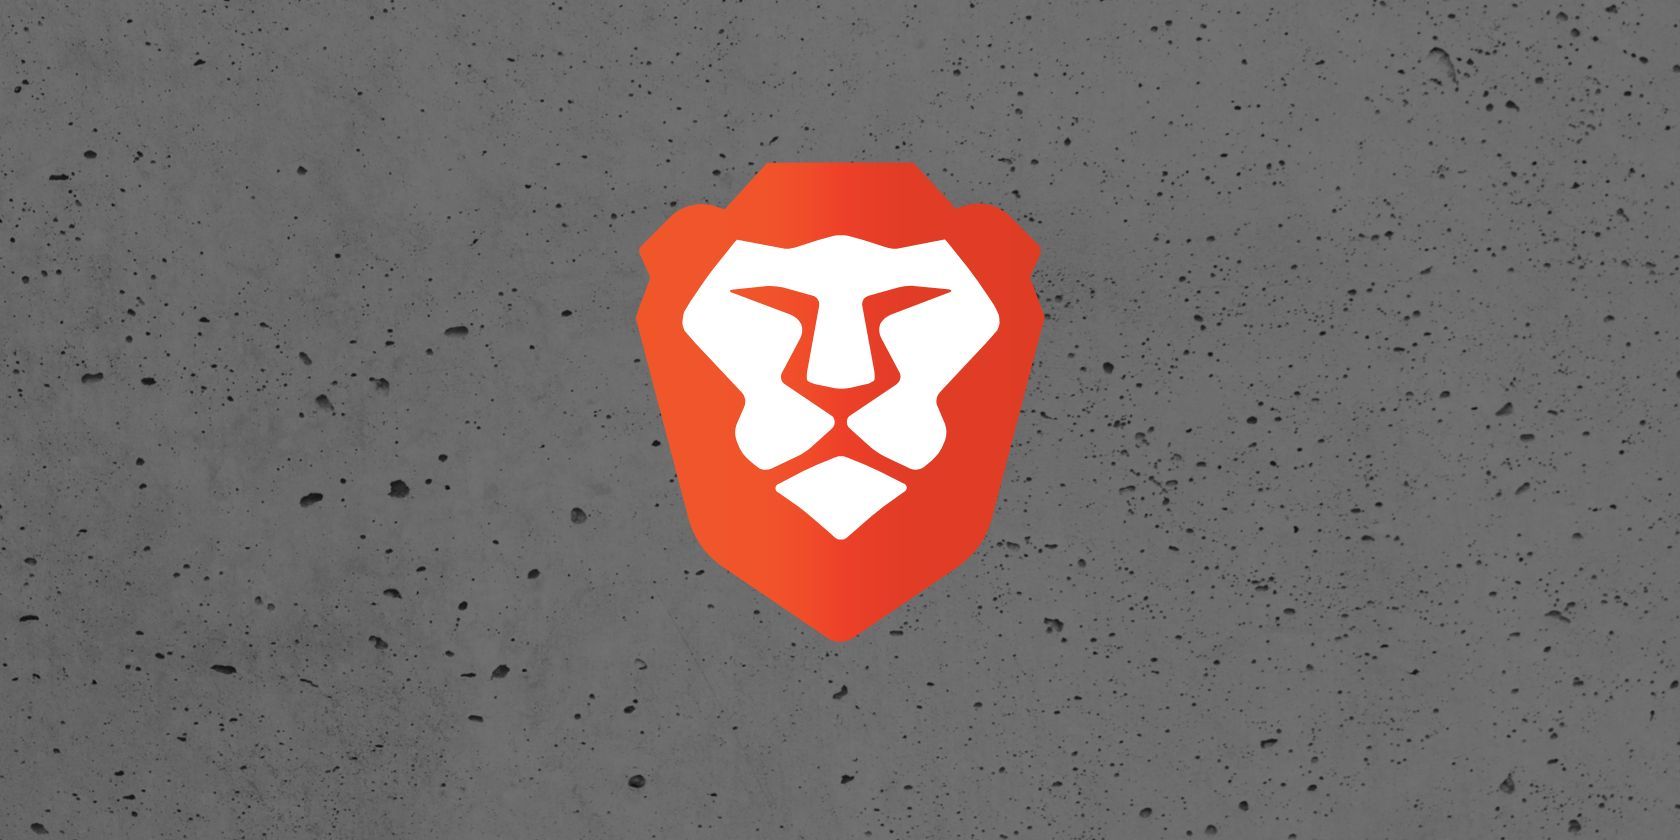 The Brave browser logo is seen on grey background